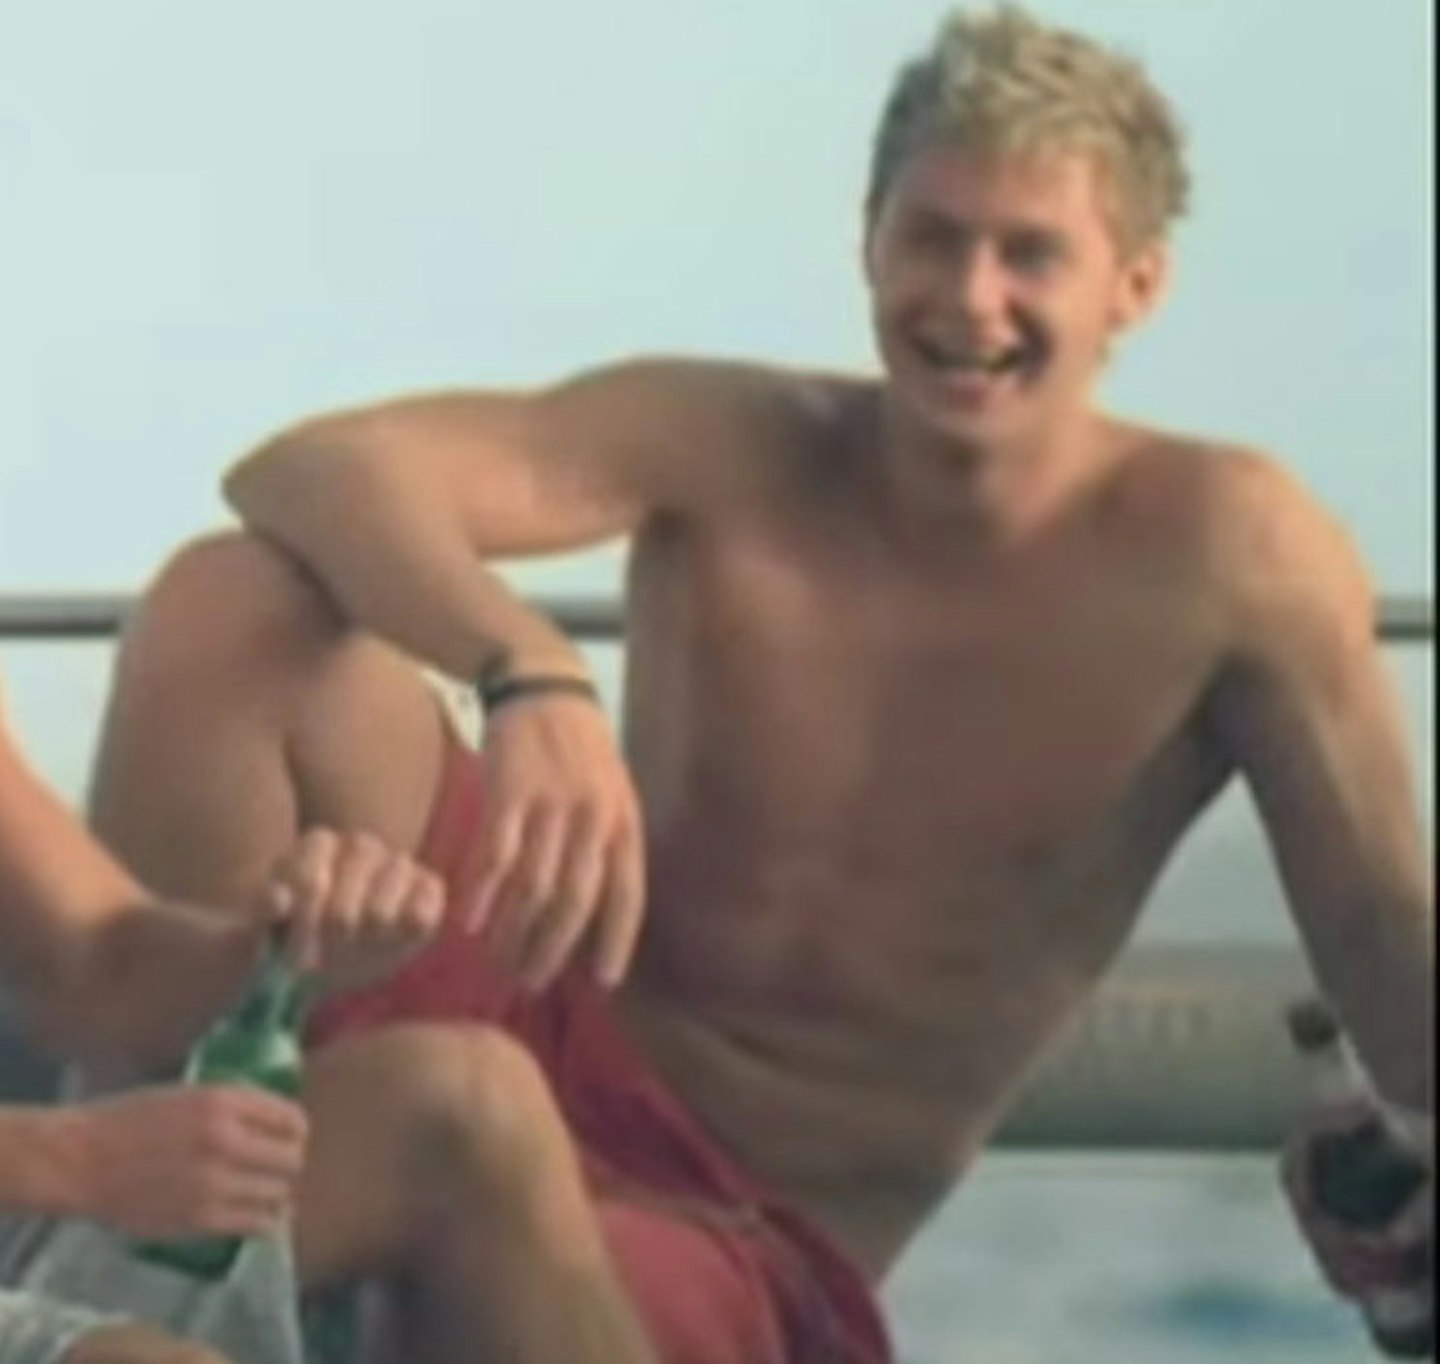 scotty t basshunter video every morning beer crop